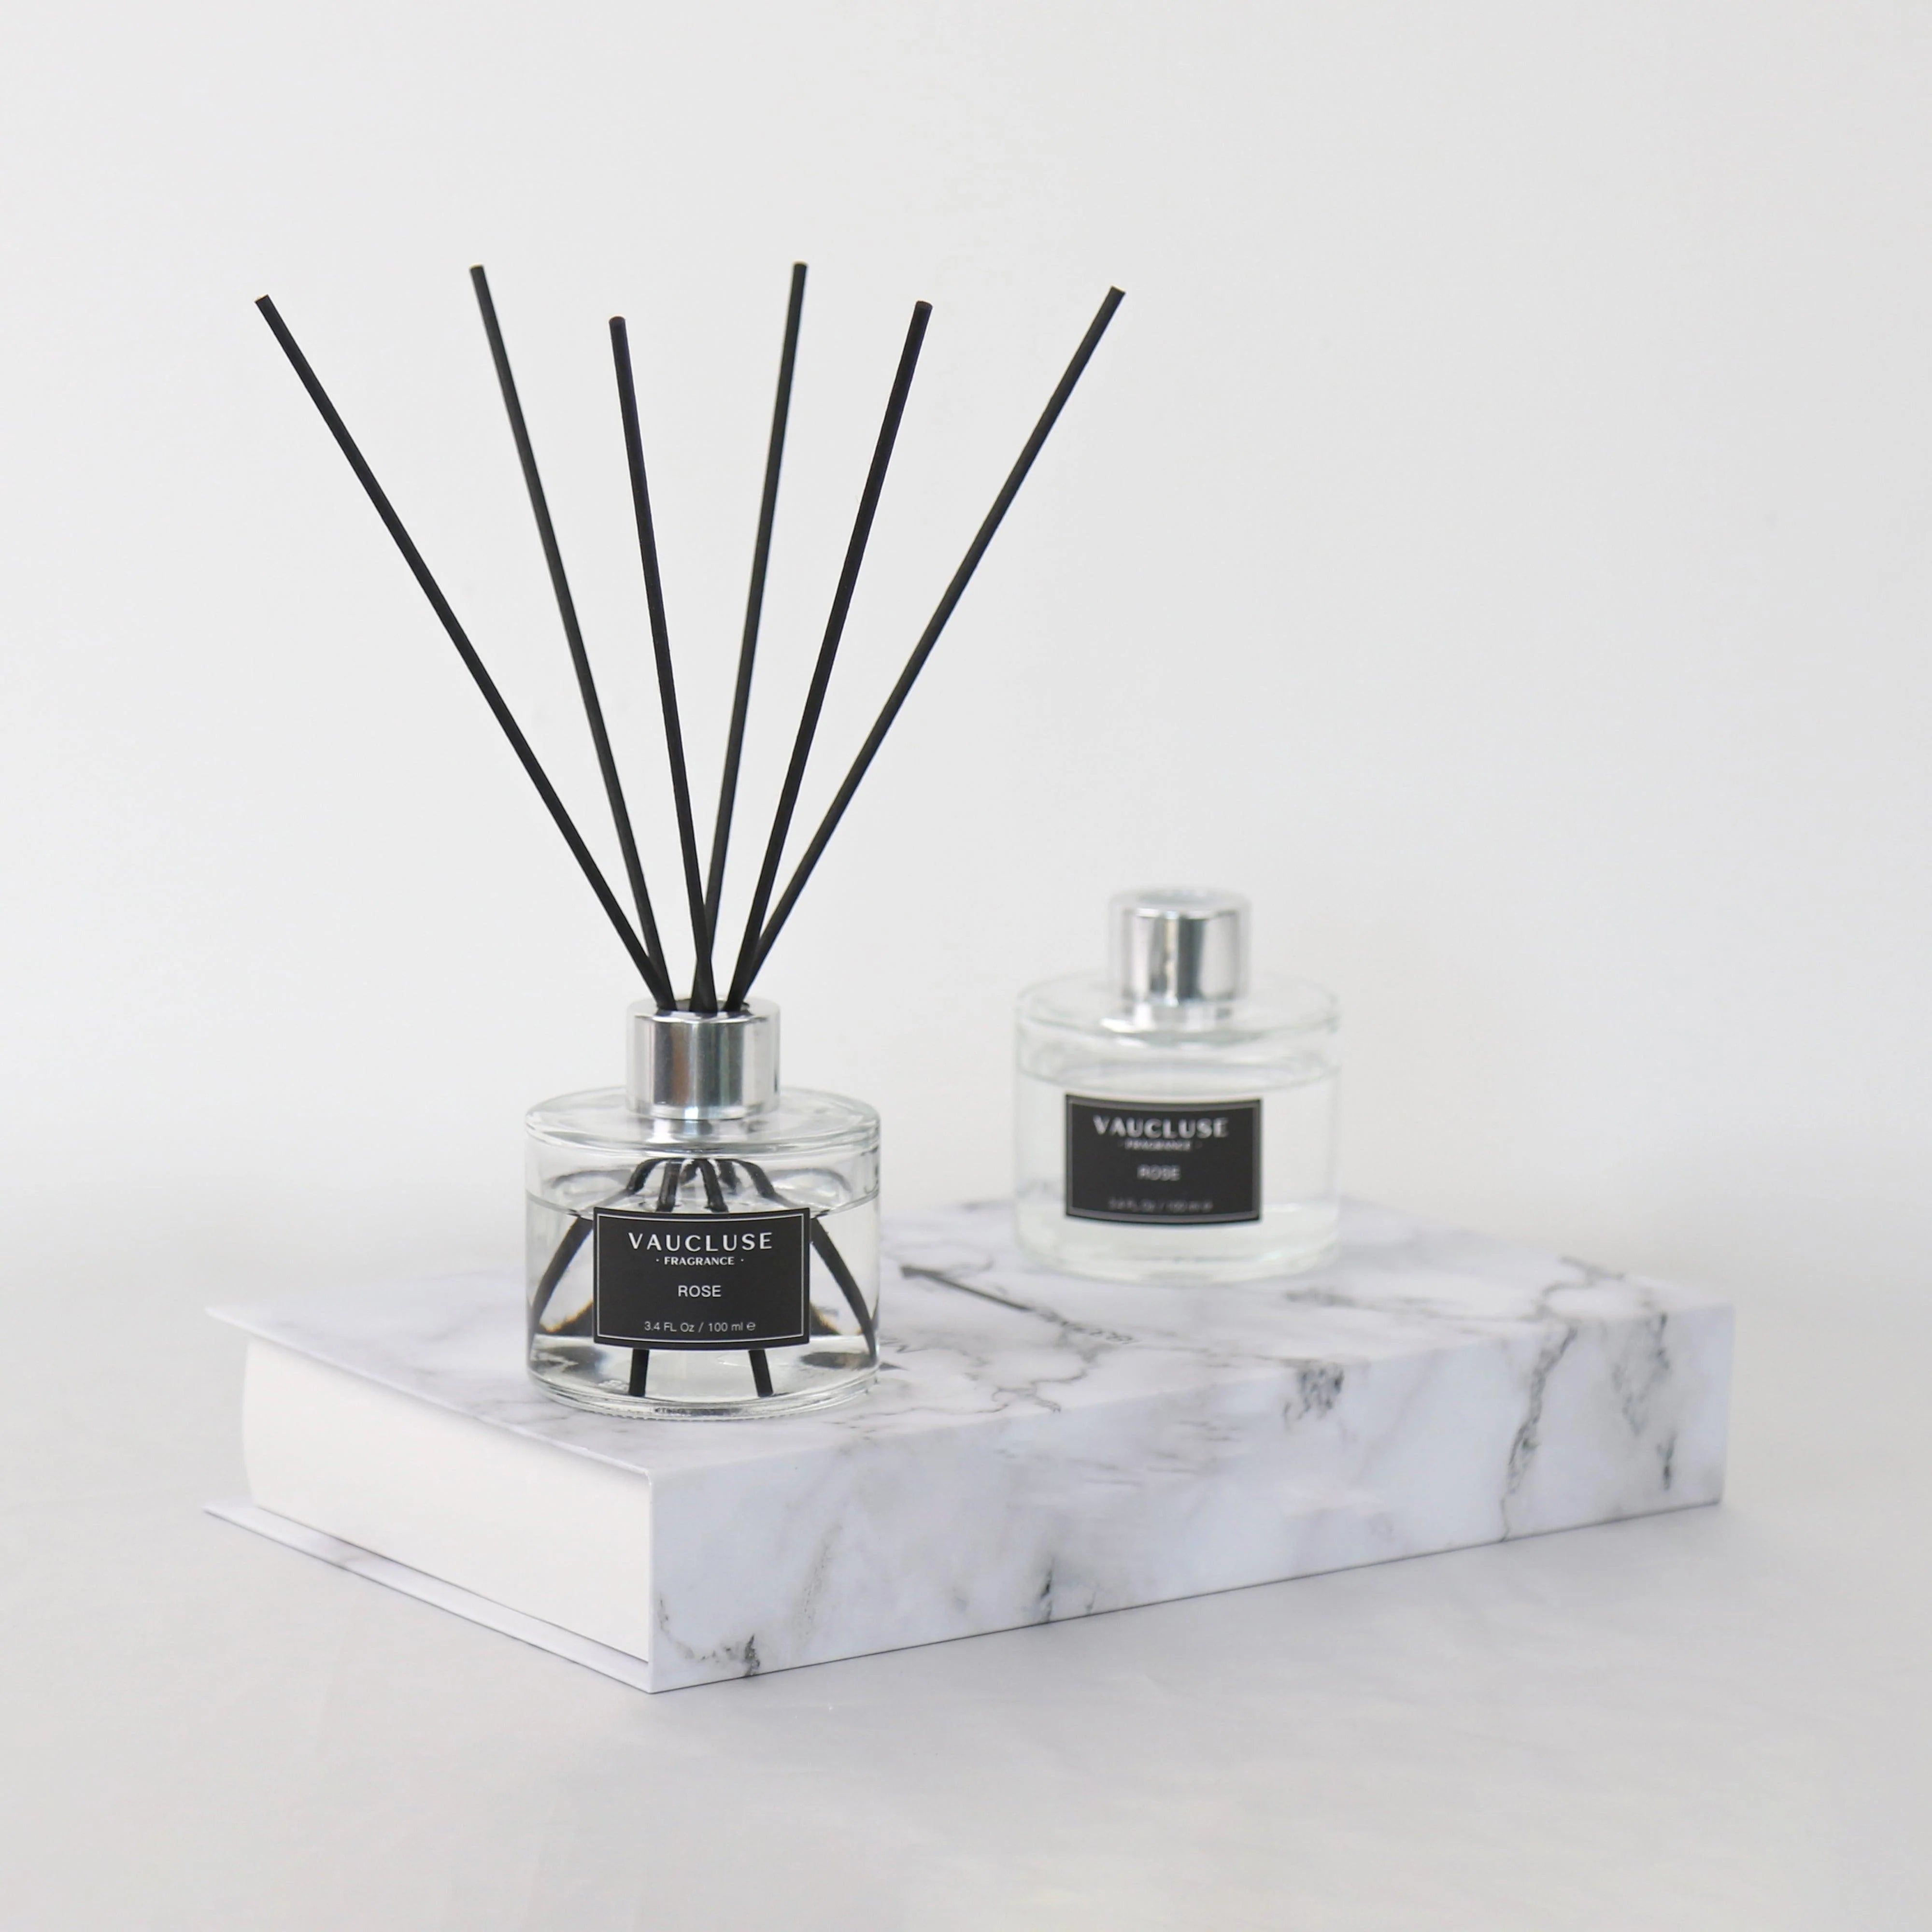 Top-Rated Reed Diffusers: A Guide to Finding the Best Scents - VAUCLUSE